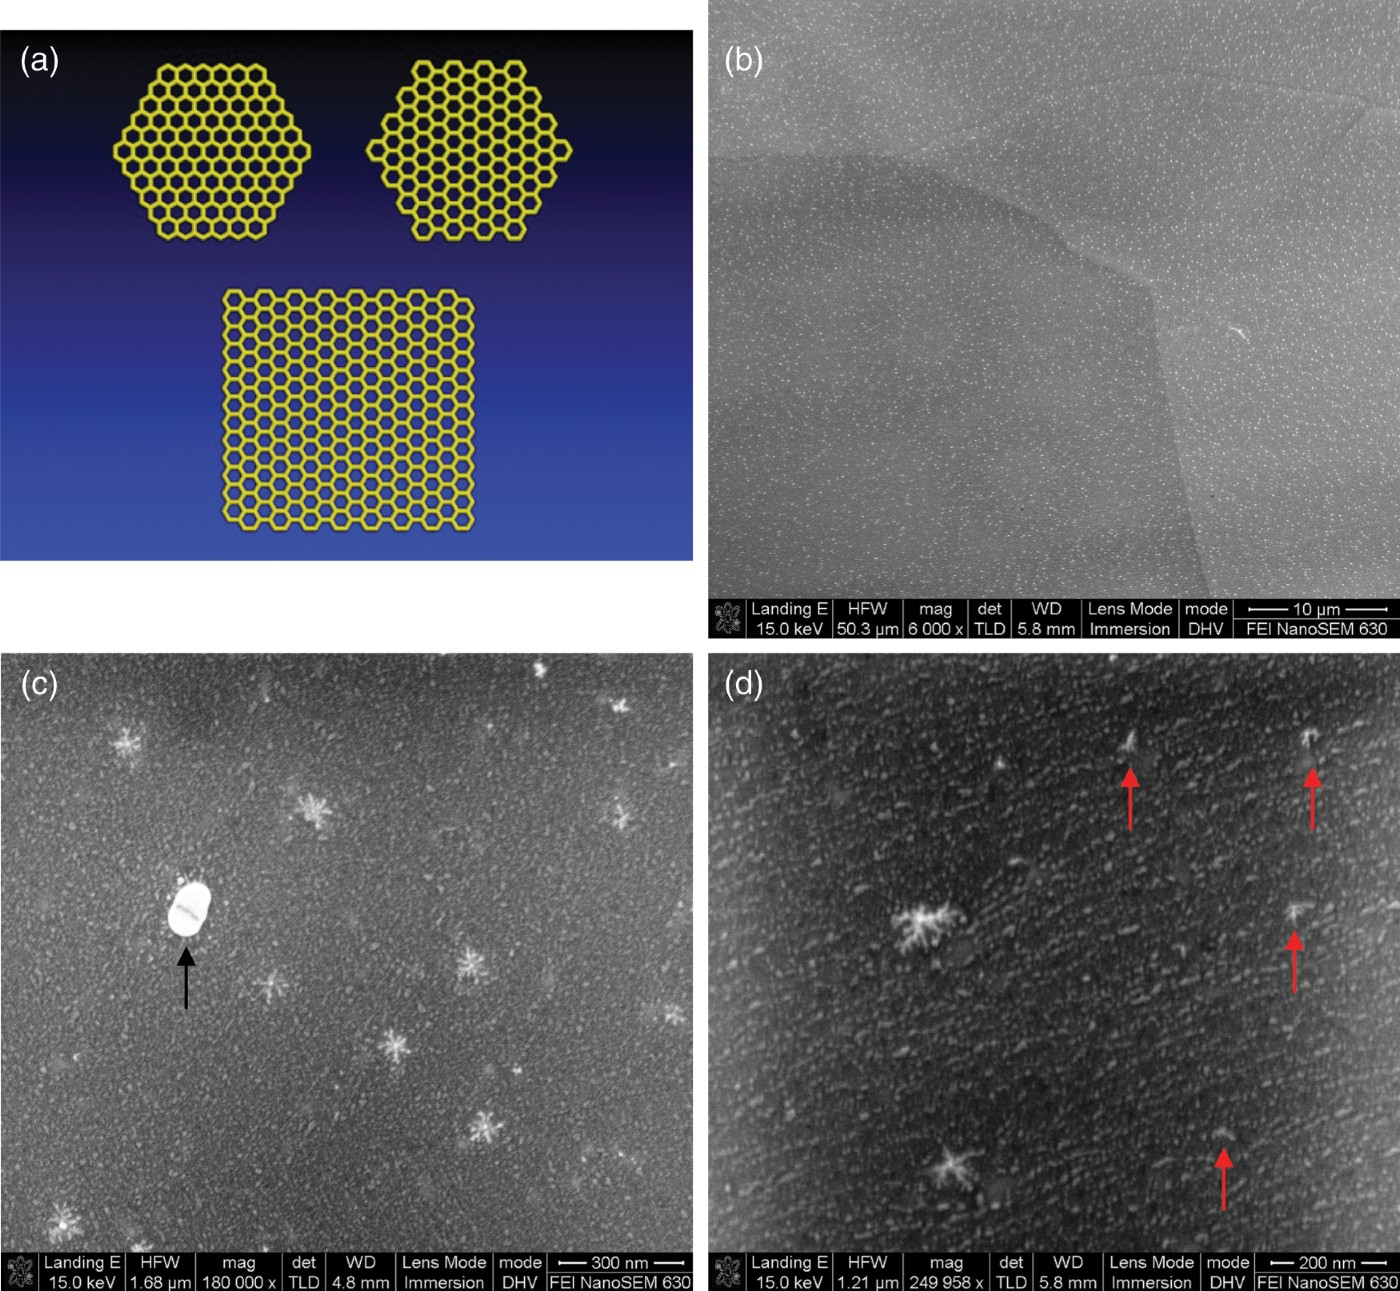 Figure 6. (a) Schematic models showing hexagonal shapes with only zigzag, only armchair edges, and a square shaped domain with both zigzag and armchair edges on sides. (b) Typical SEM image of the Cu surface showing the Cu grain boundaries and Cu nanoparticles. (c, d) High-magnification SEM images showing a big Cu particle, dendrite-like Cu nanoparticles, and rough Cu surface morphologies.